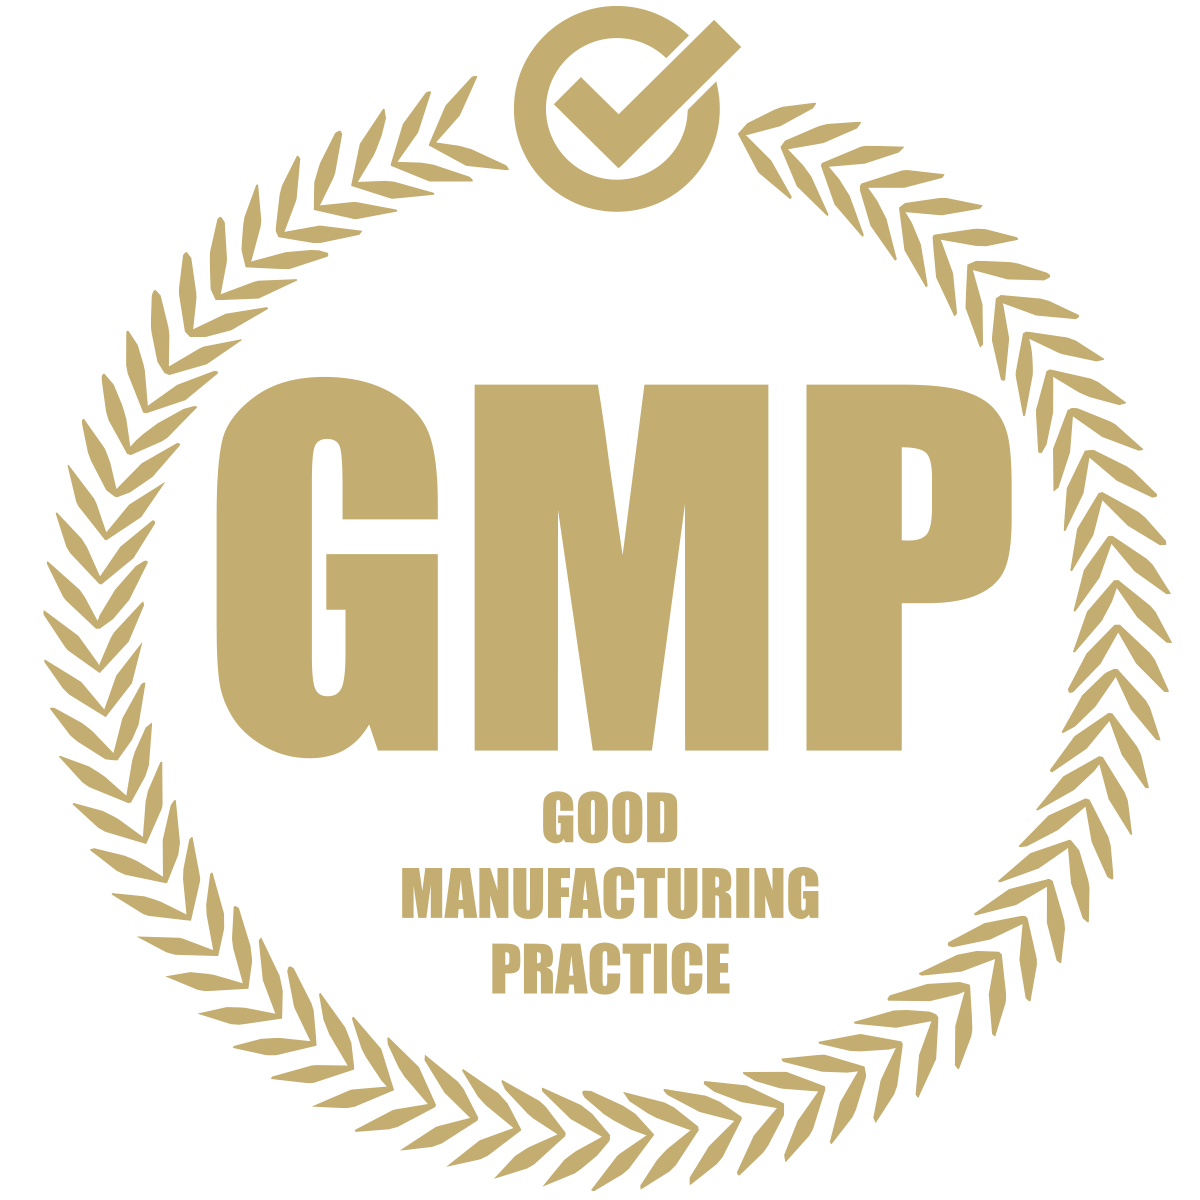 bocanix-manufacturing-quality-icons-gmp-gold